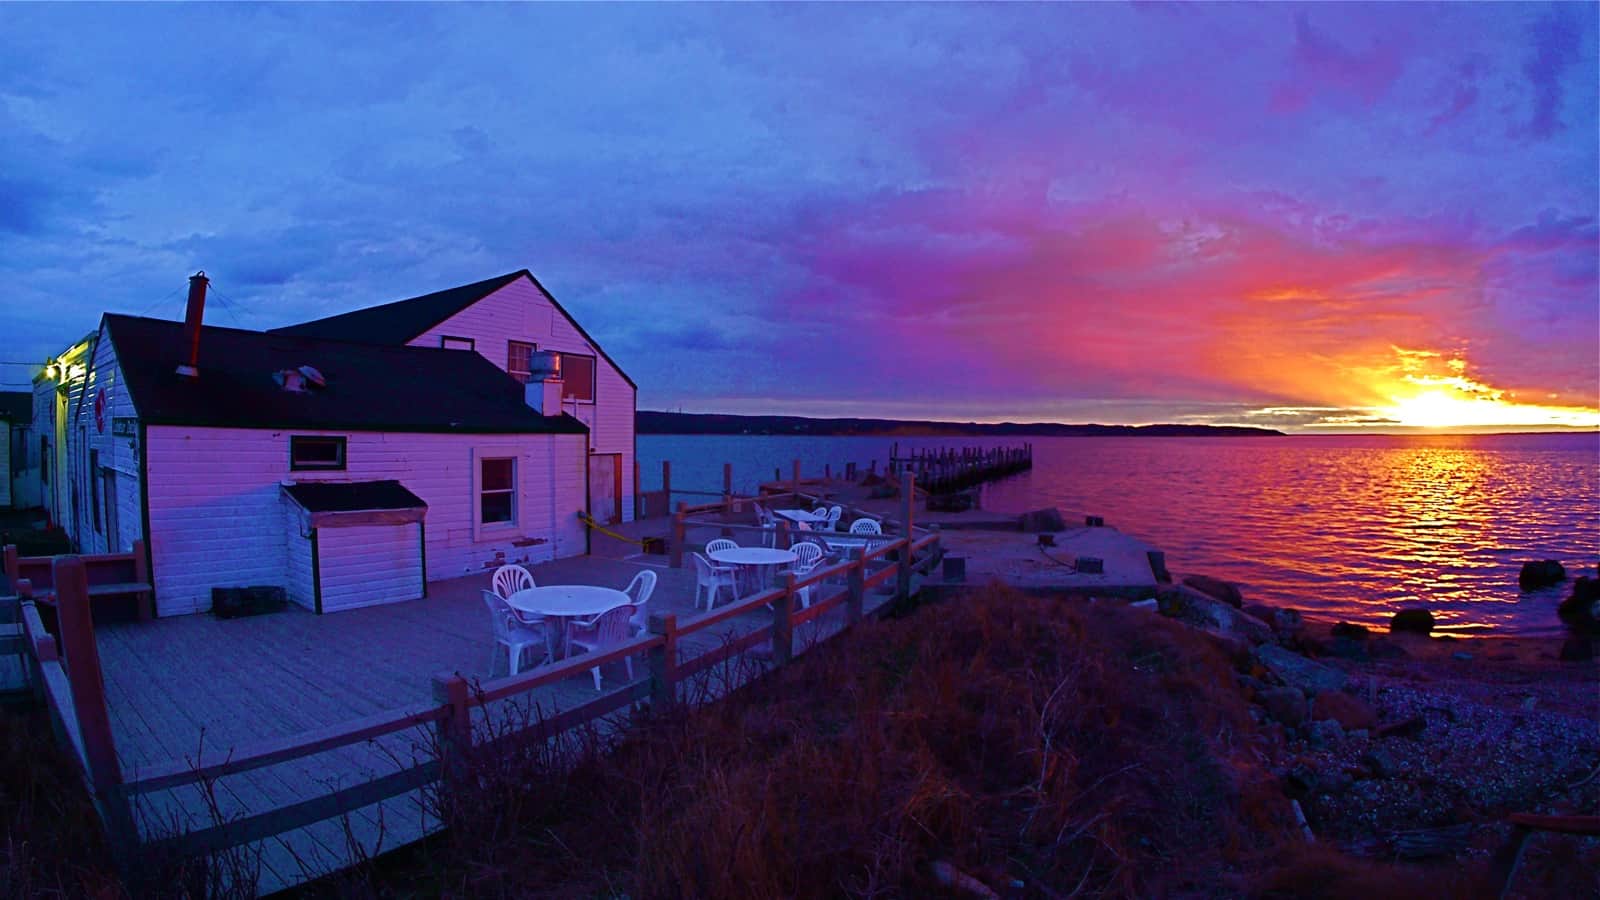 Sunset over Fort Pond Bay as seen from Duryea's Lobster, March 28 2013, Montauk NY, photo by Sailing Montauk